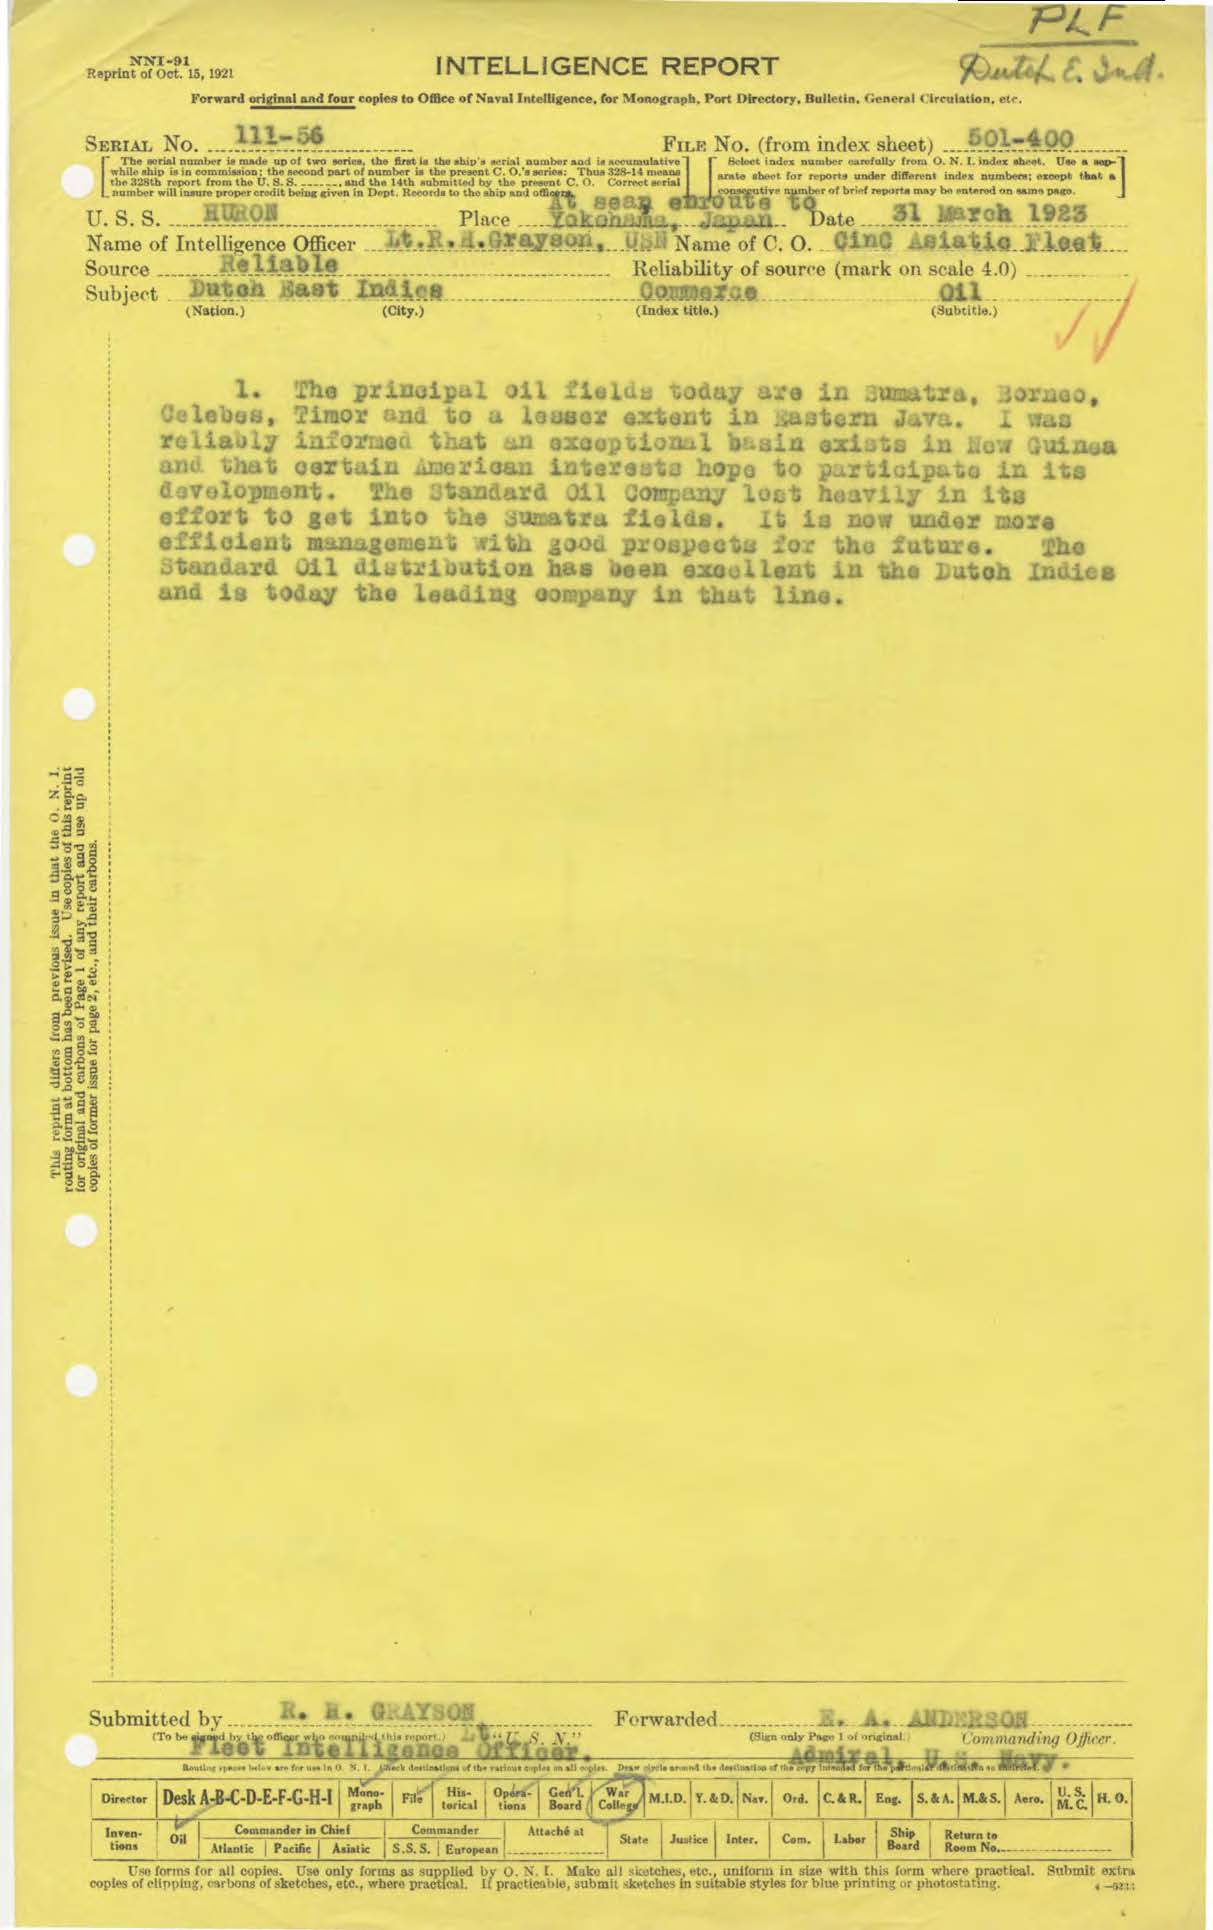 Intelligence report on coal and oil supplies in the Dutch East Indies